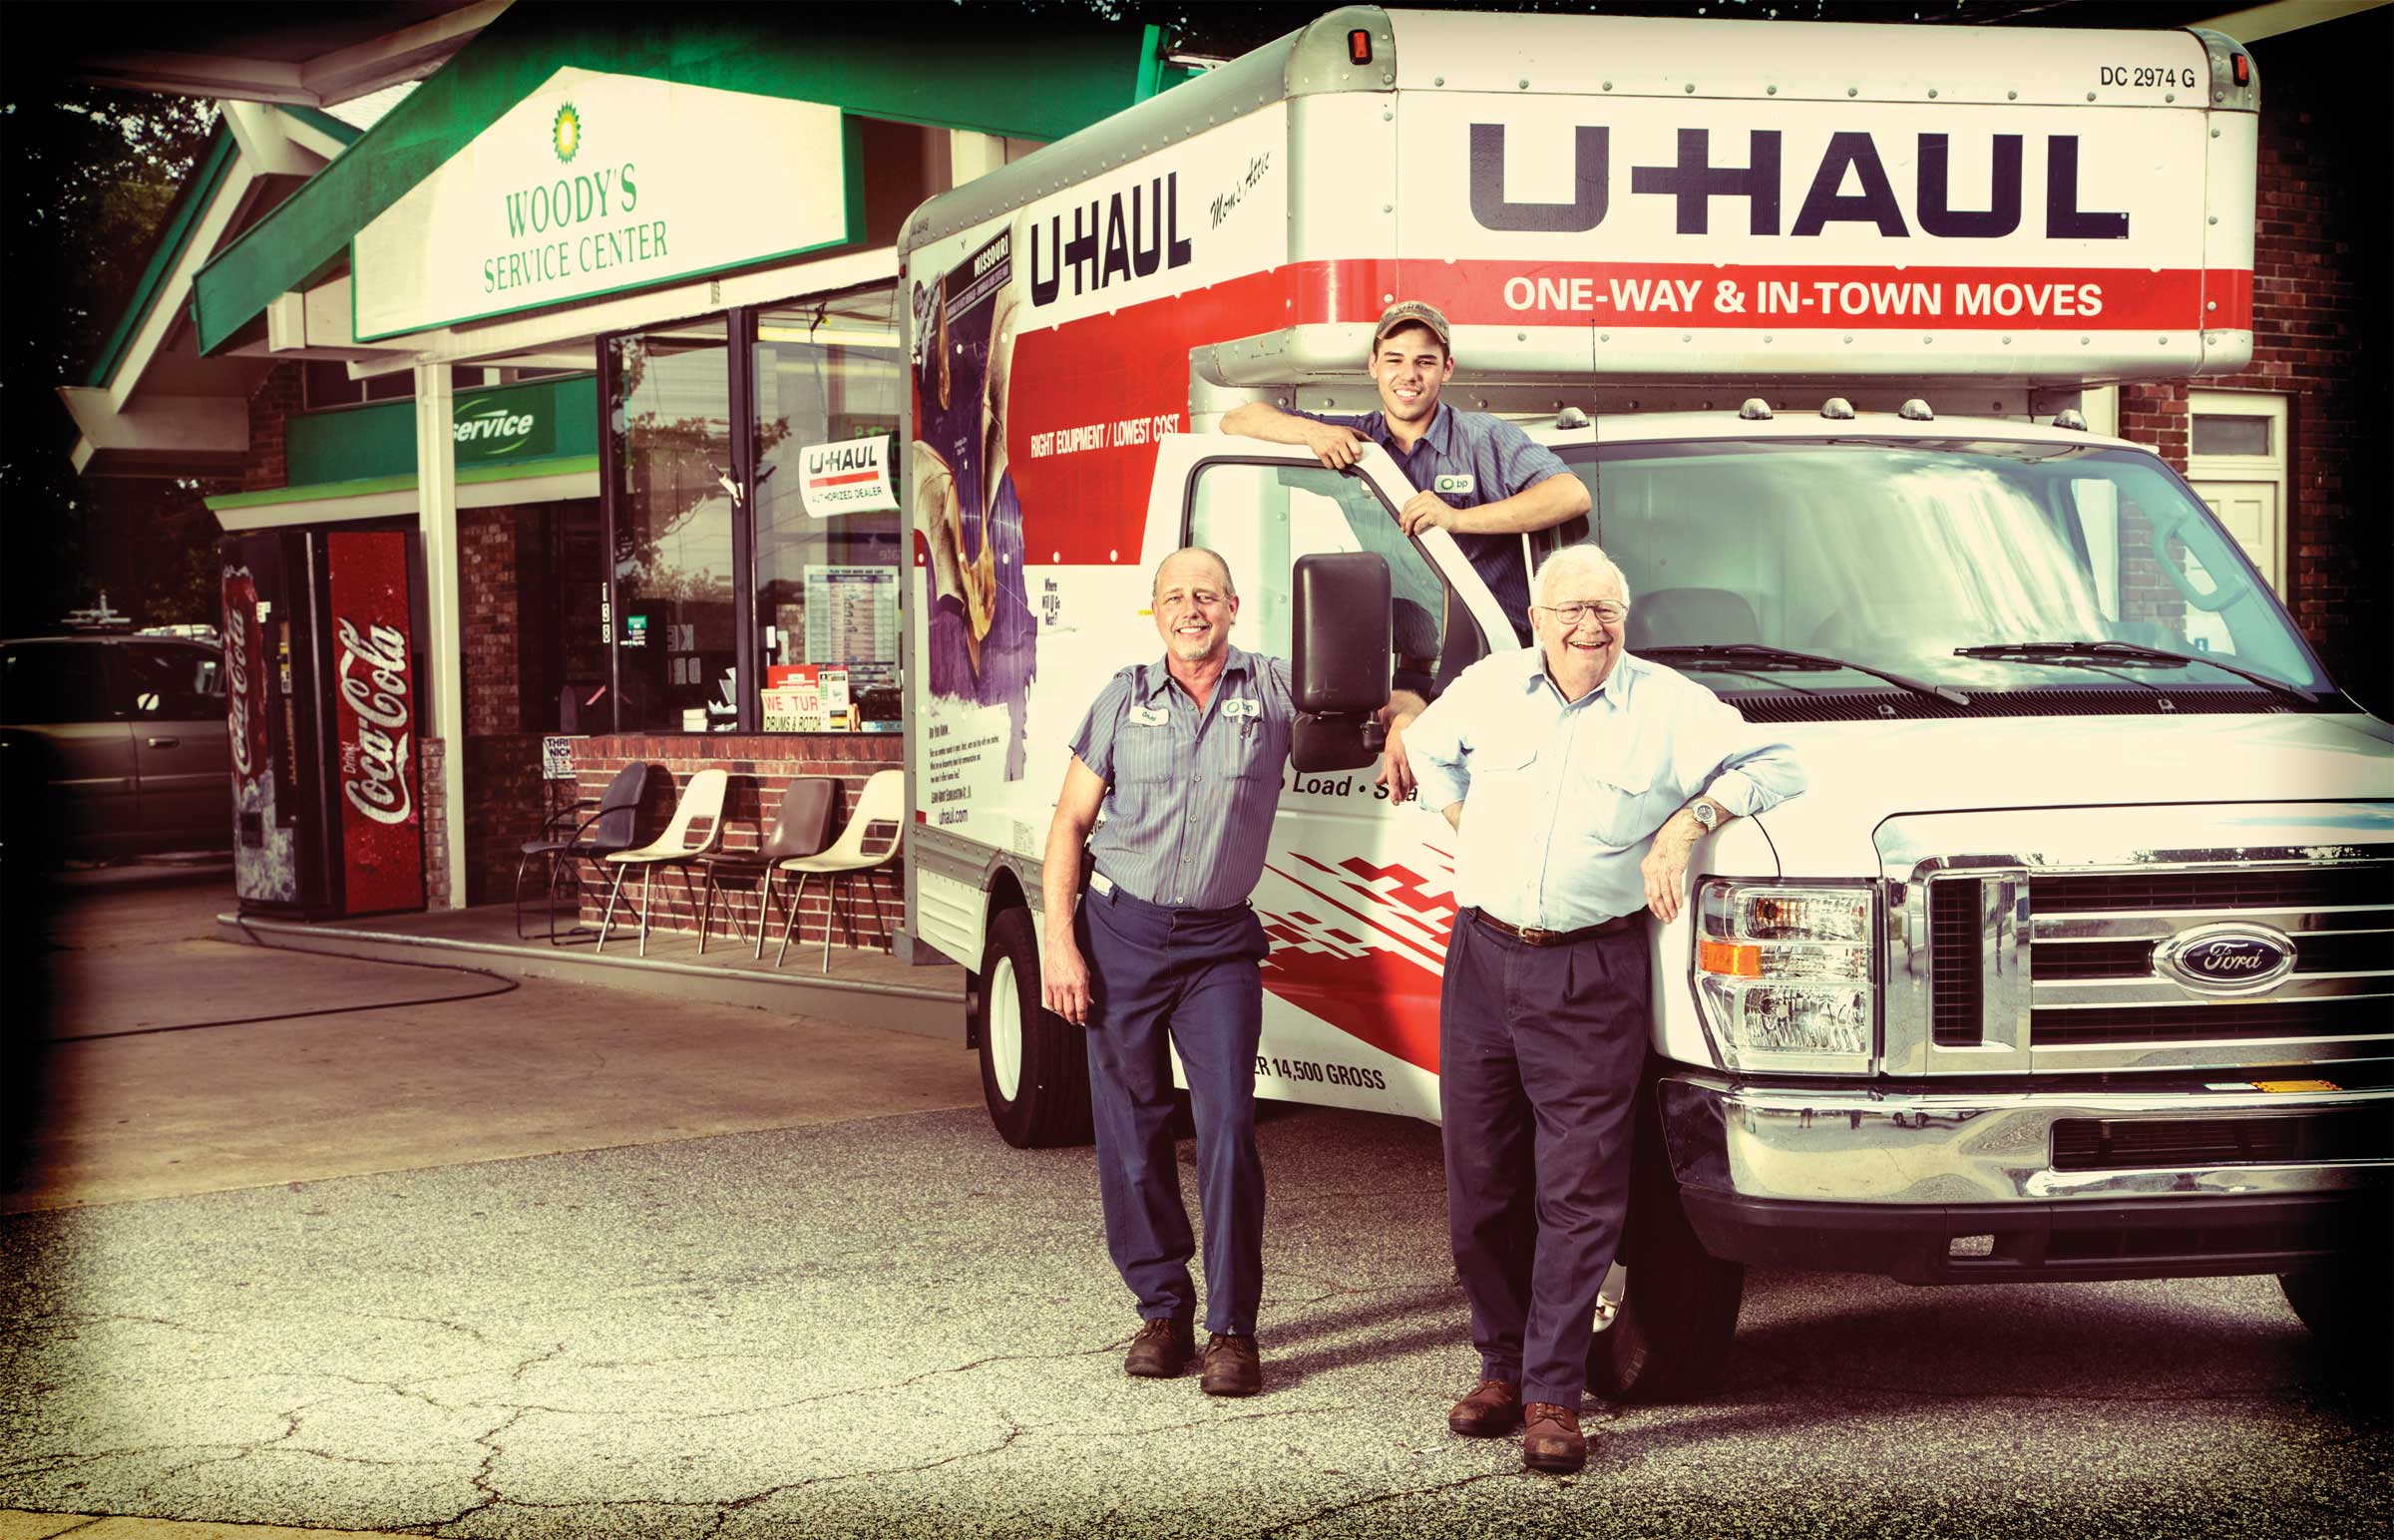 Expansive Network: Neighborhood dealers, who offer U-Haul products to supplement their primary businesses, are the backbone of our operation. More than 17,000 dealers give our customers more pick-up/drop-off locations than anyone in the industry.